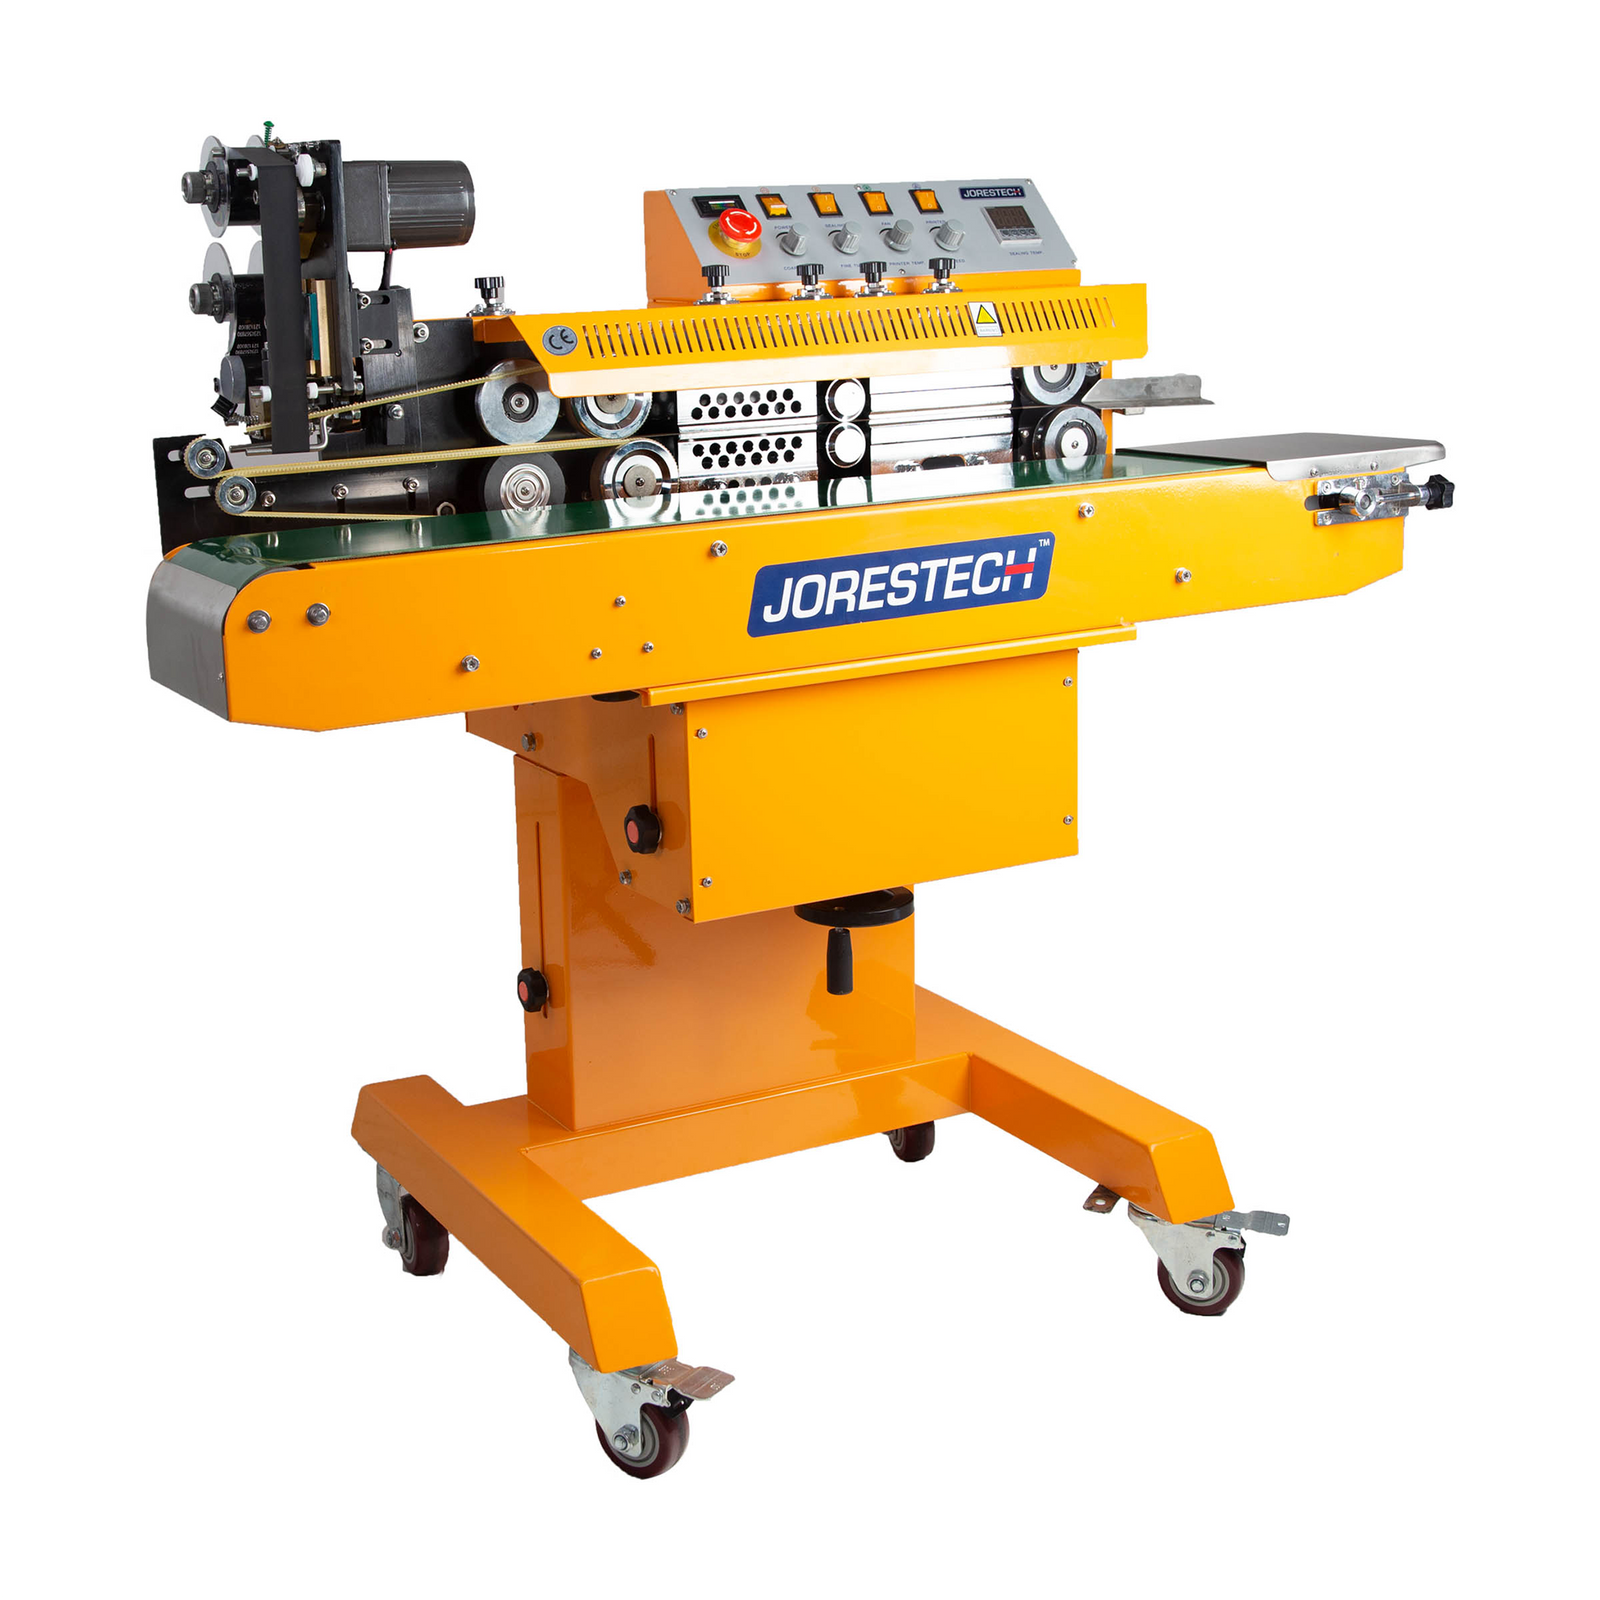 Semi-Automatic Hot Stamping Machine for Foil Printing & Stamping by JORES Technologies